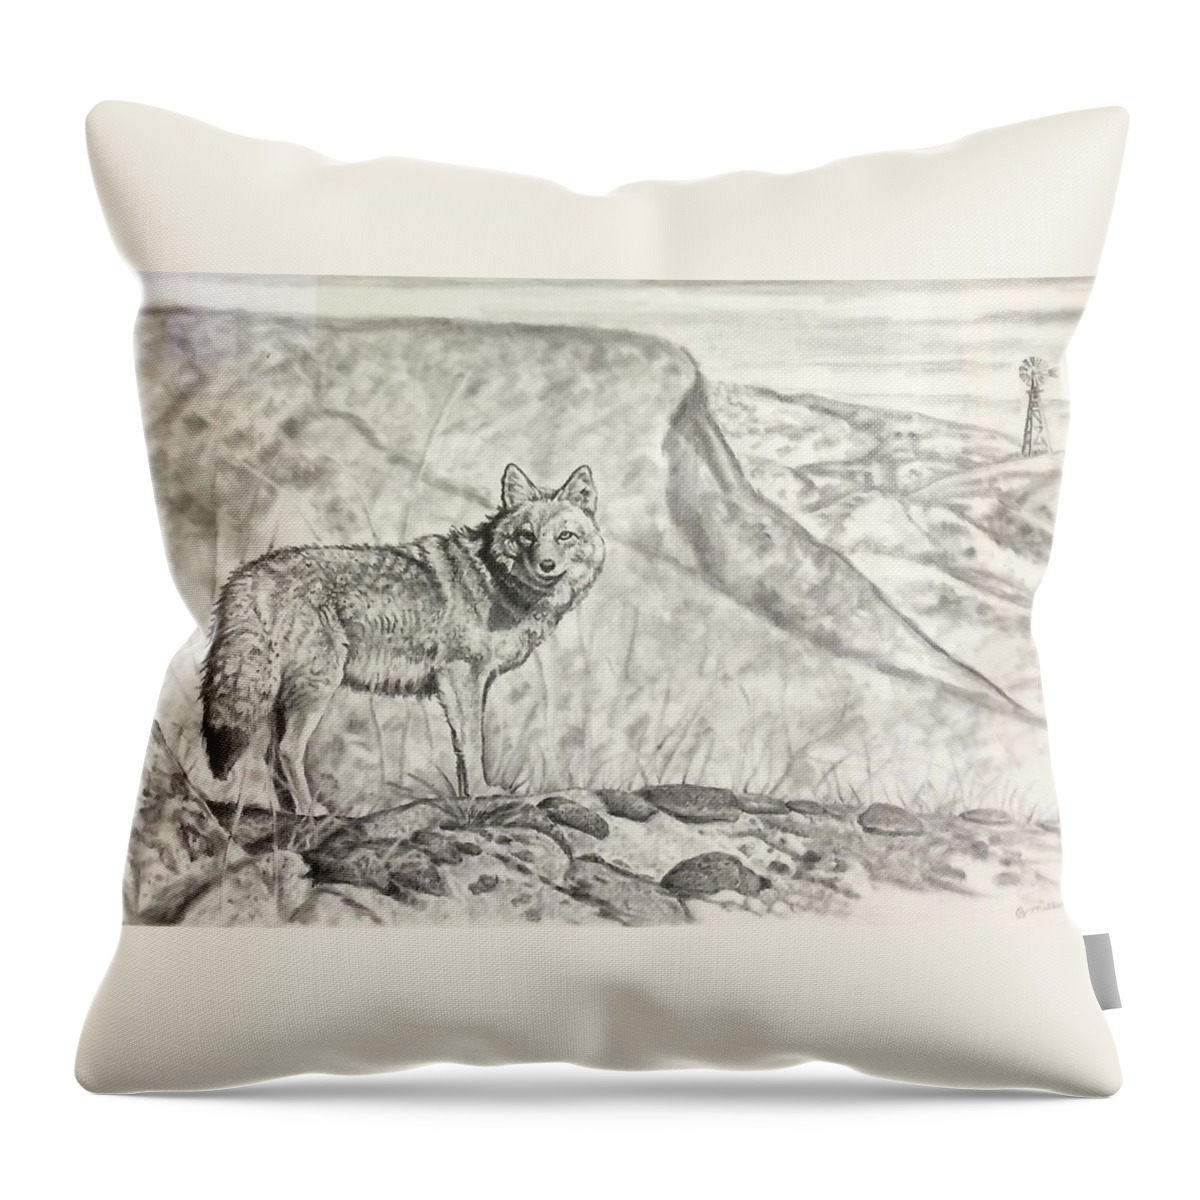 Art Throw Pillow featuring the drawing Coyote by Bern Miller